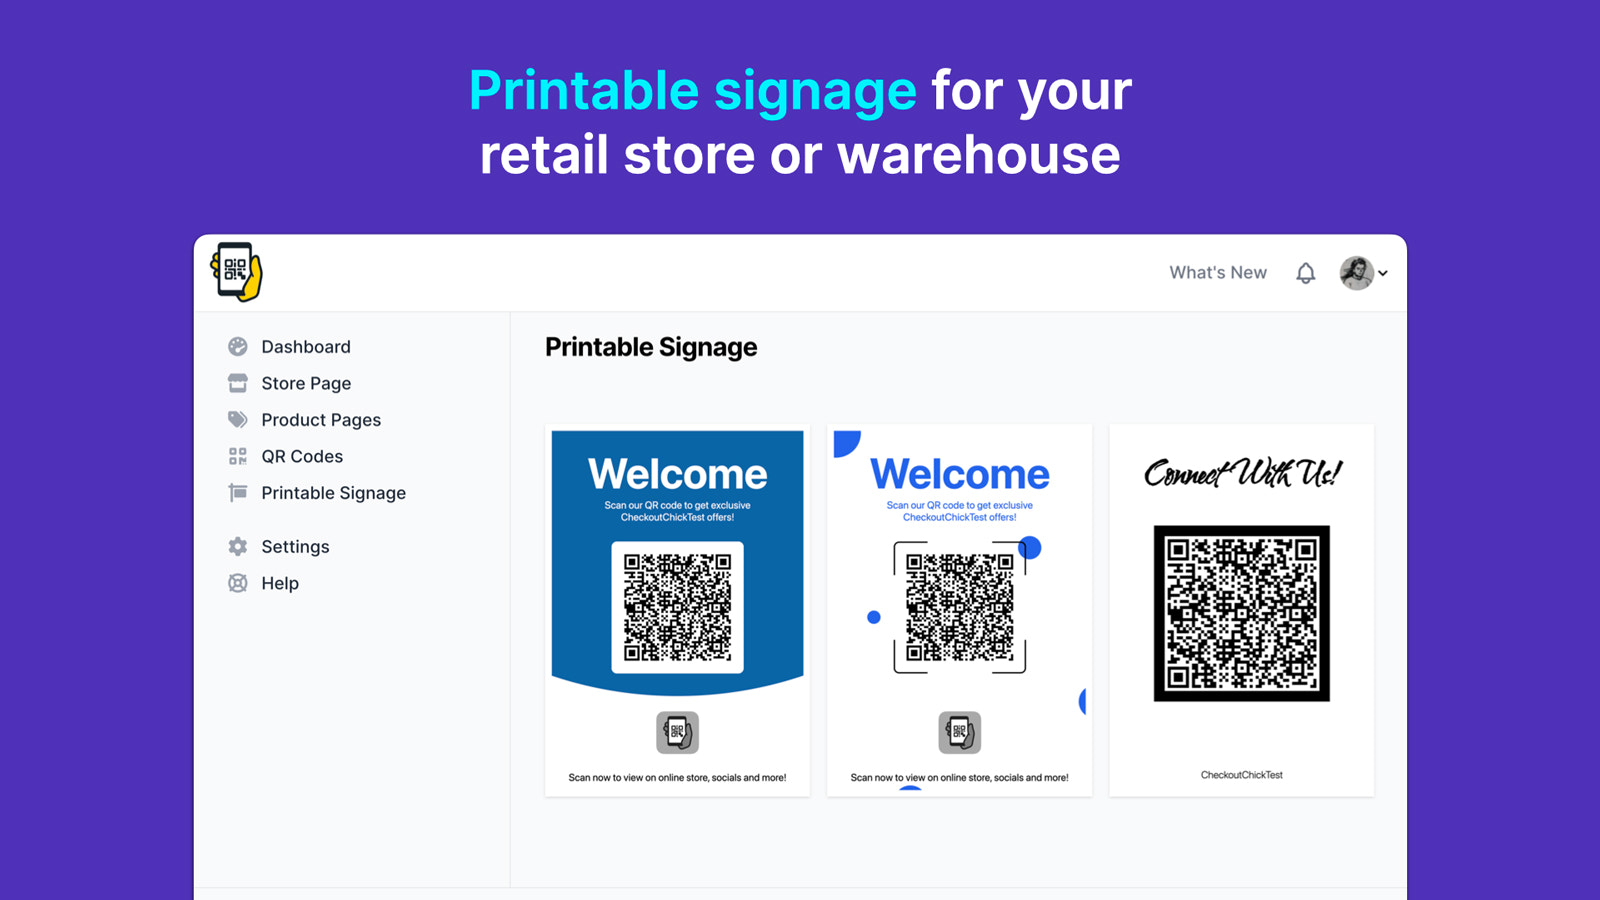 Print out signage for your retail store or warehouse